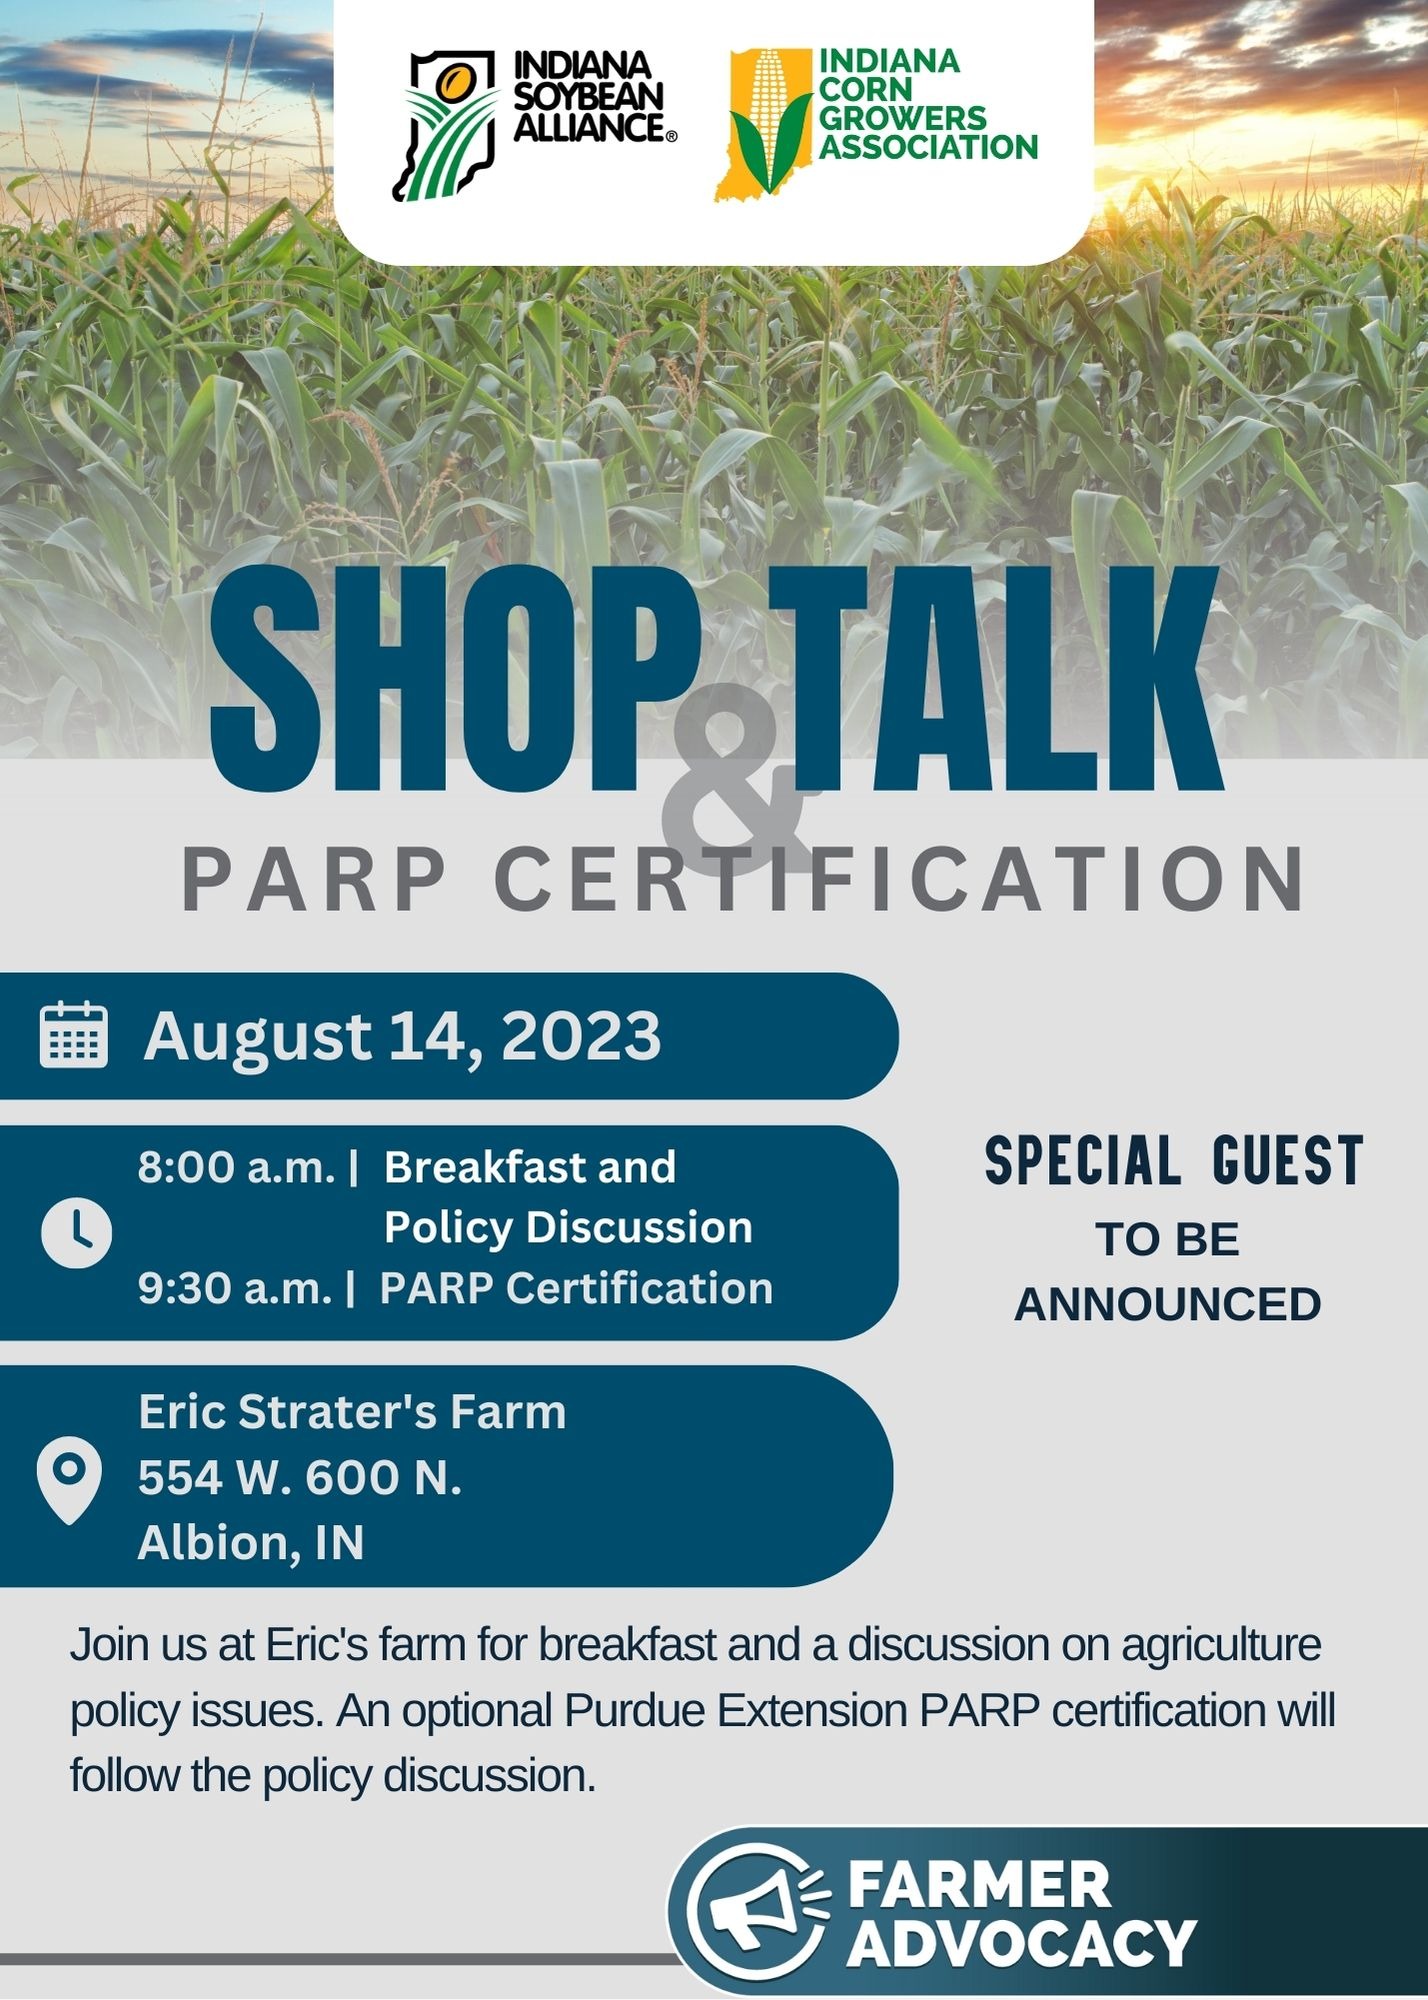 Aug 14th Shop Talk and PARP Certification